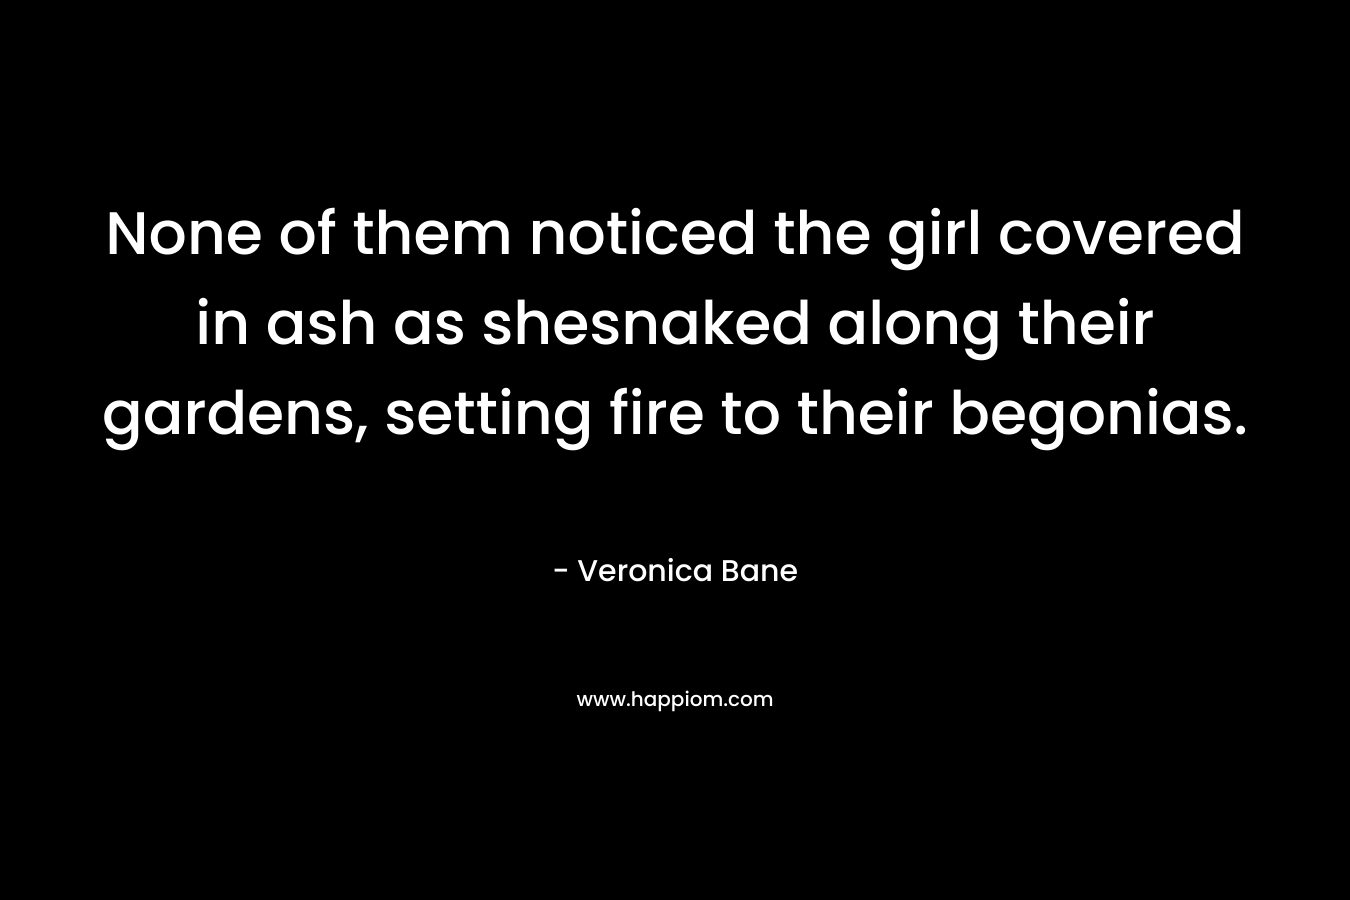 None of them noticed the girl covered in ash as shesnaked along their gardens, setting fire to their begonias. – Veronica Bane